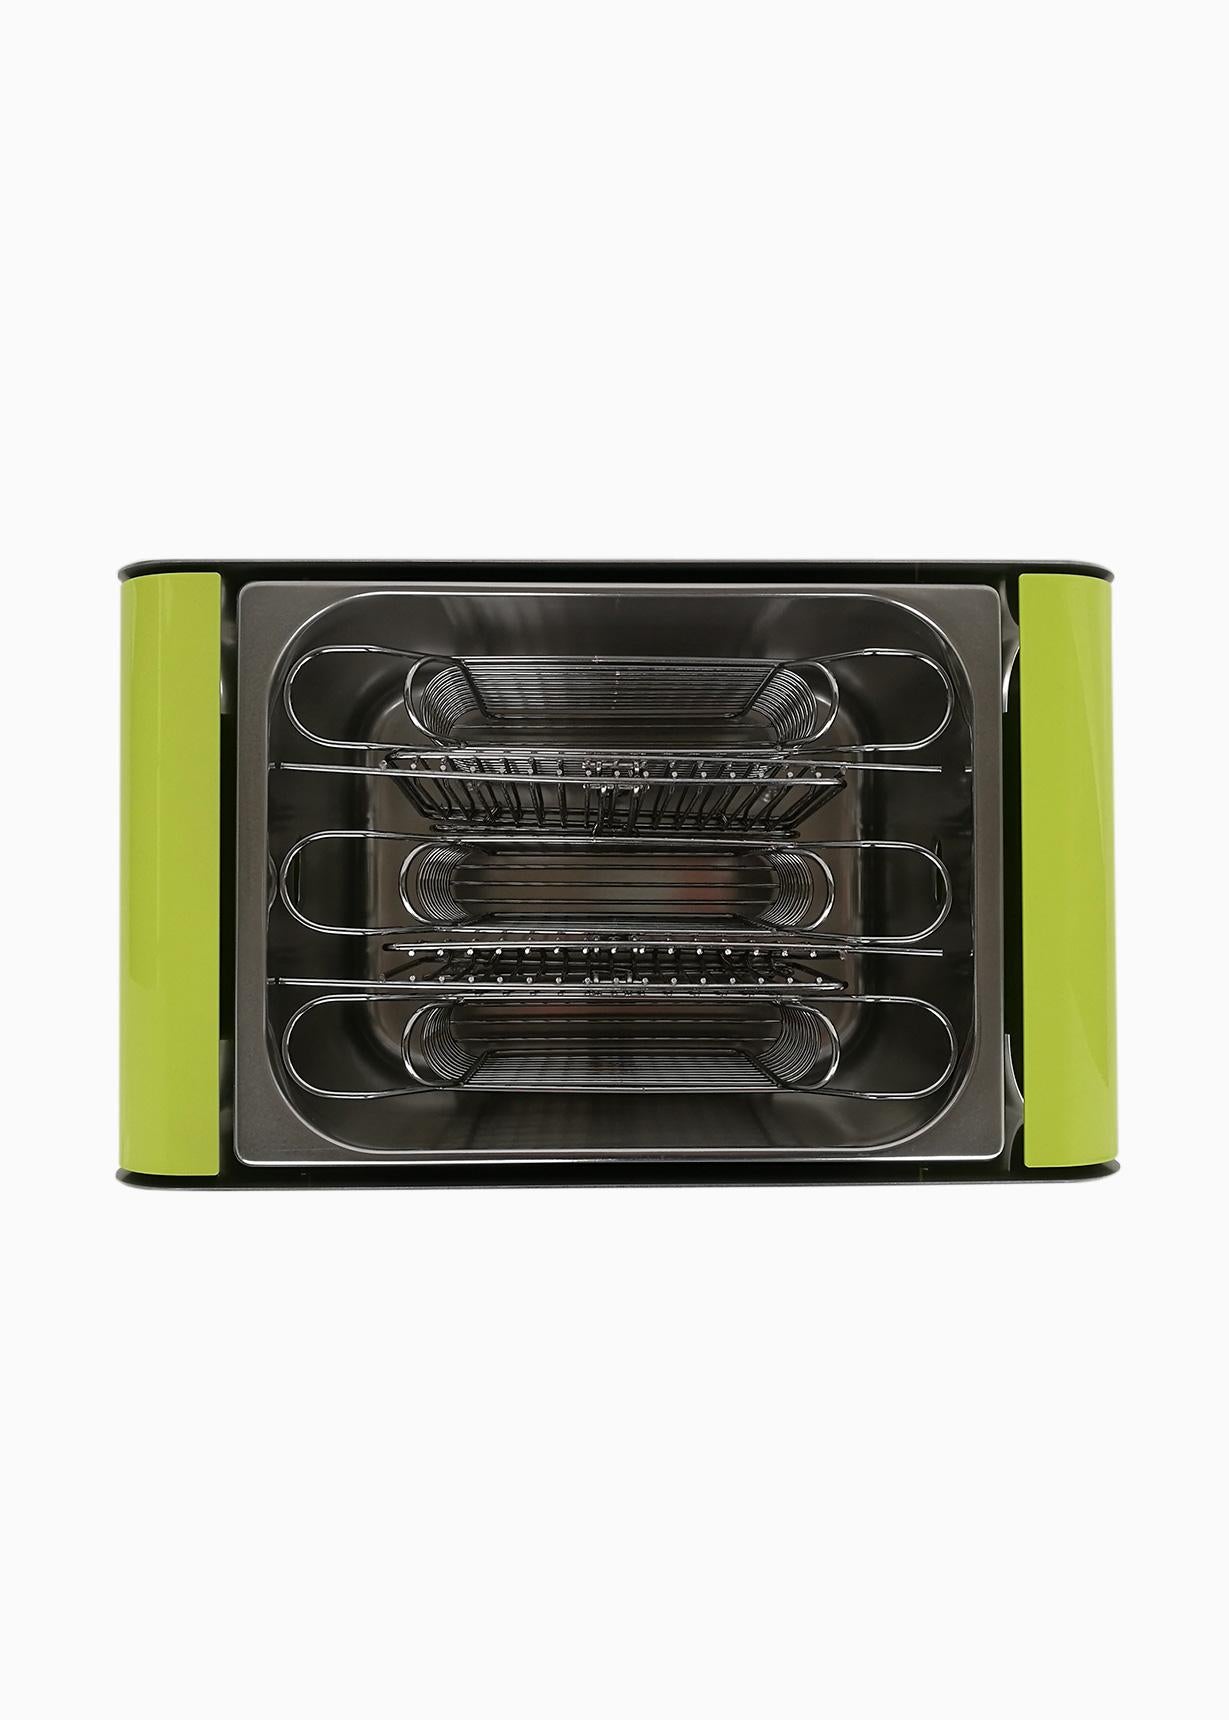 Modern Upright Cooking Charcoal Barbecue, Grill Green For Sale